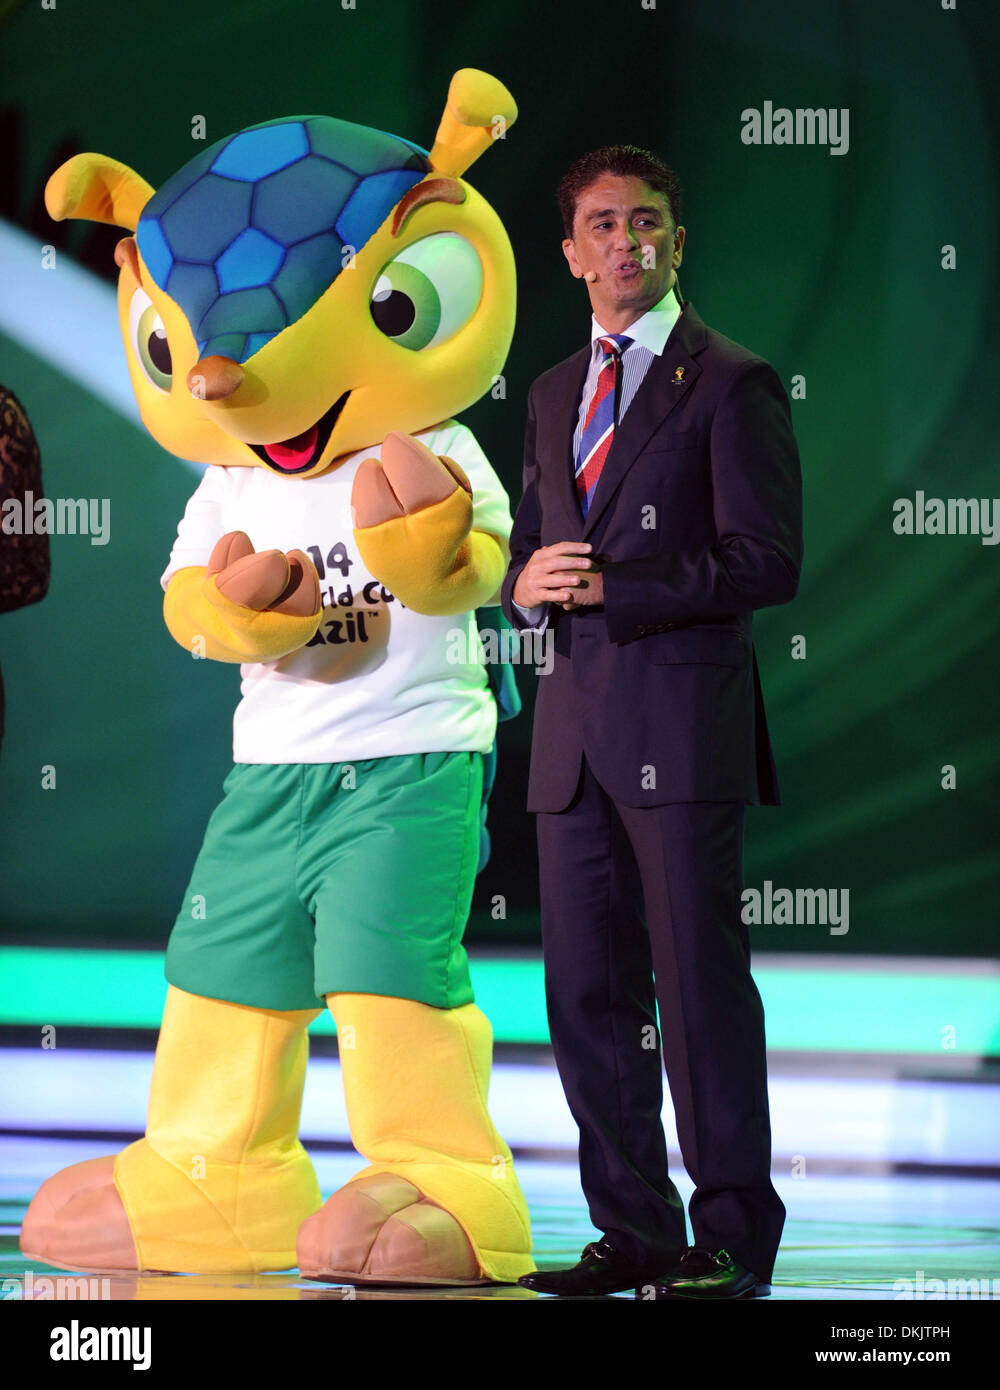 Costa Do Sauipe, Brazil. 6th Dec, 2013. Former Brazilian soccer player Jose Roberto Gama de Oliveira, also known as Bebeto (R), and the mascot Fuleco (L) attend the ceremony of the final draw for the groups and matchups of the 2014 FIFA World Cup Brazil in Costa do Sauipe, Brazil, on Dec. 6, 2013. Credit:  Xinhua/Alamy Live News Stock Photo